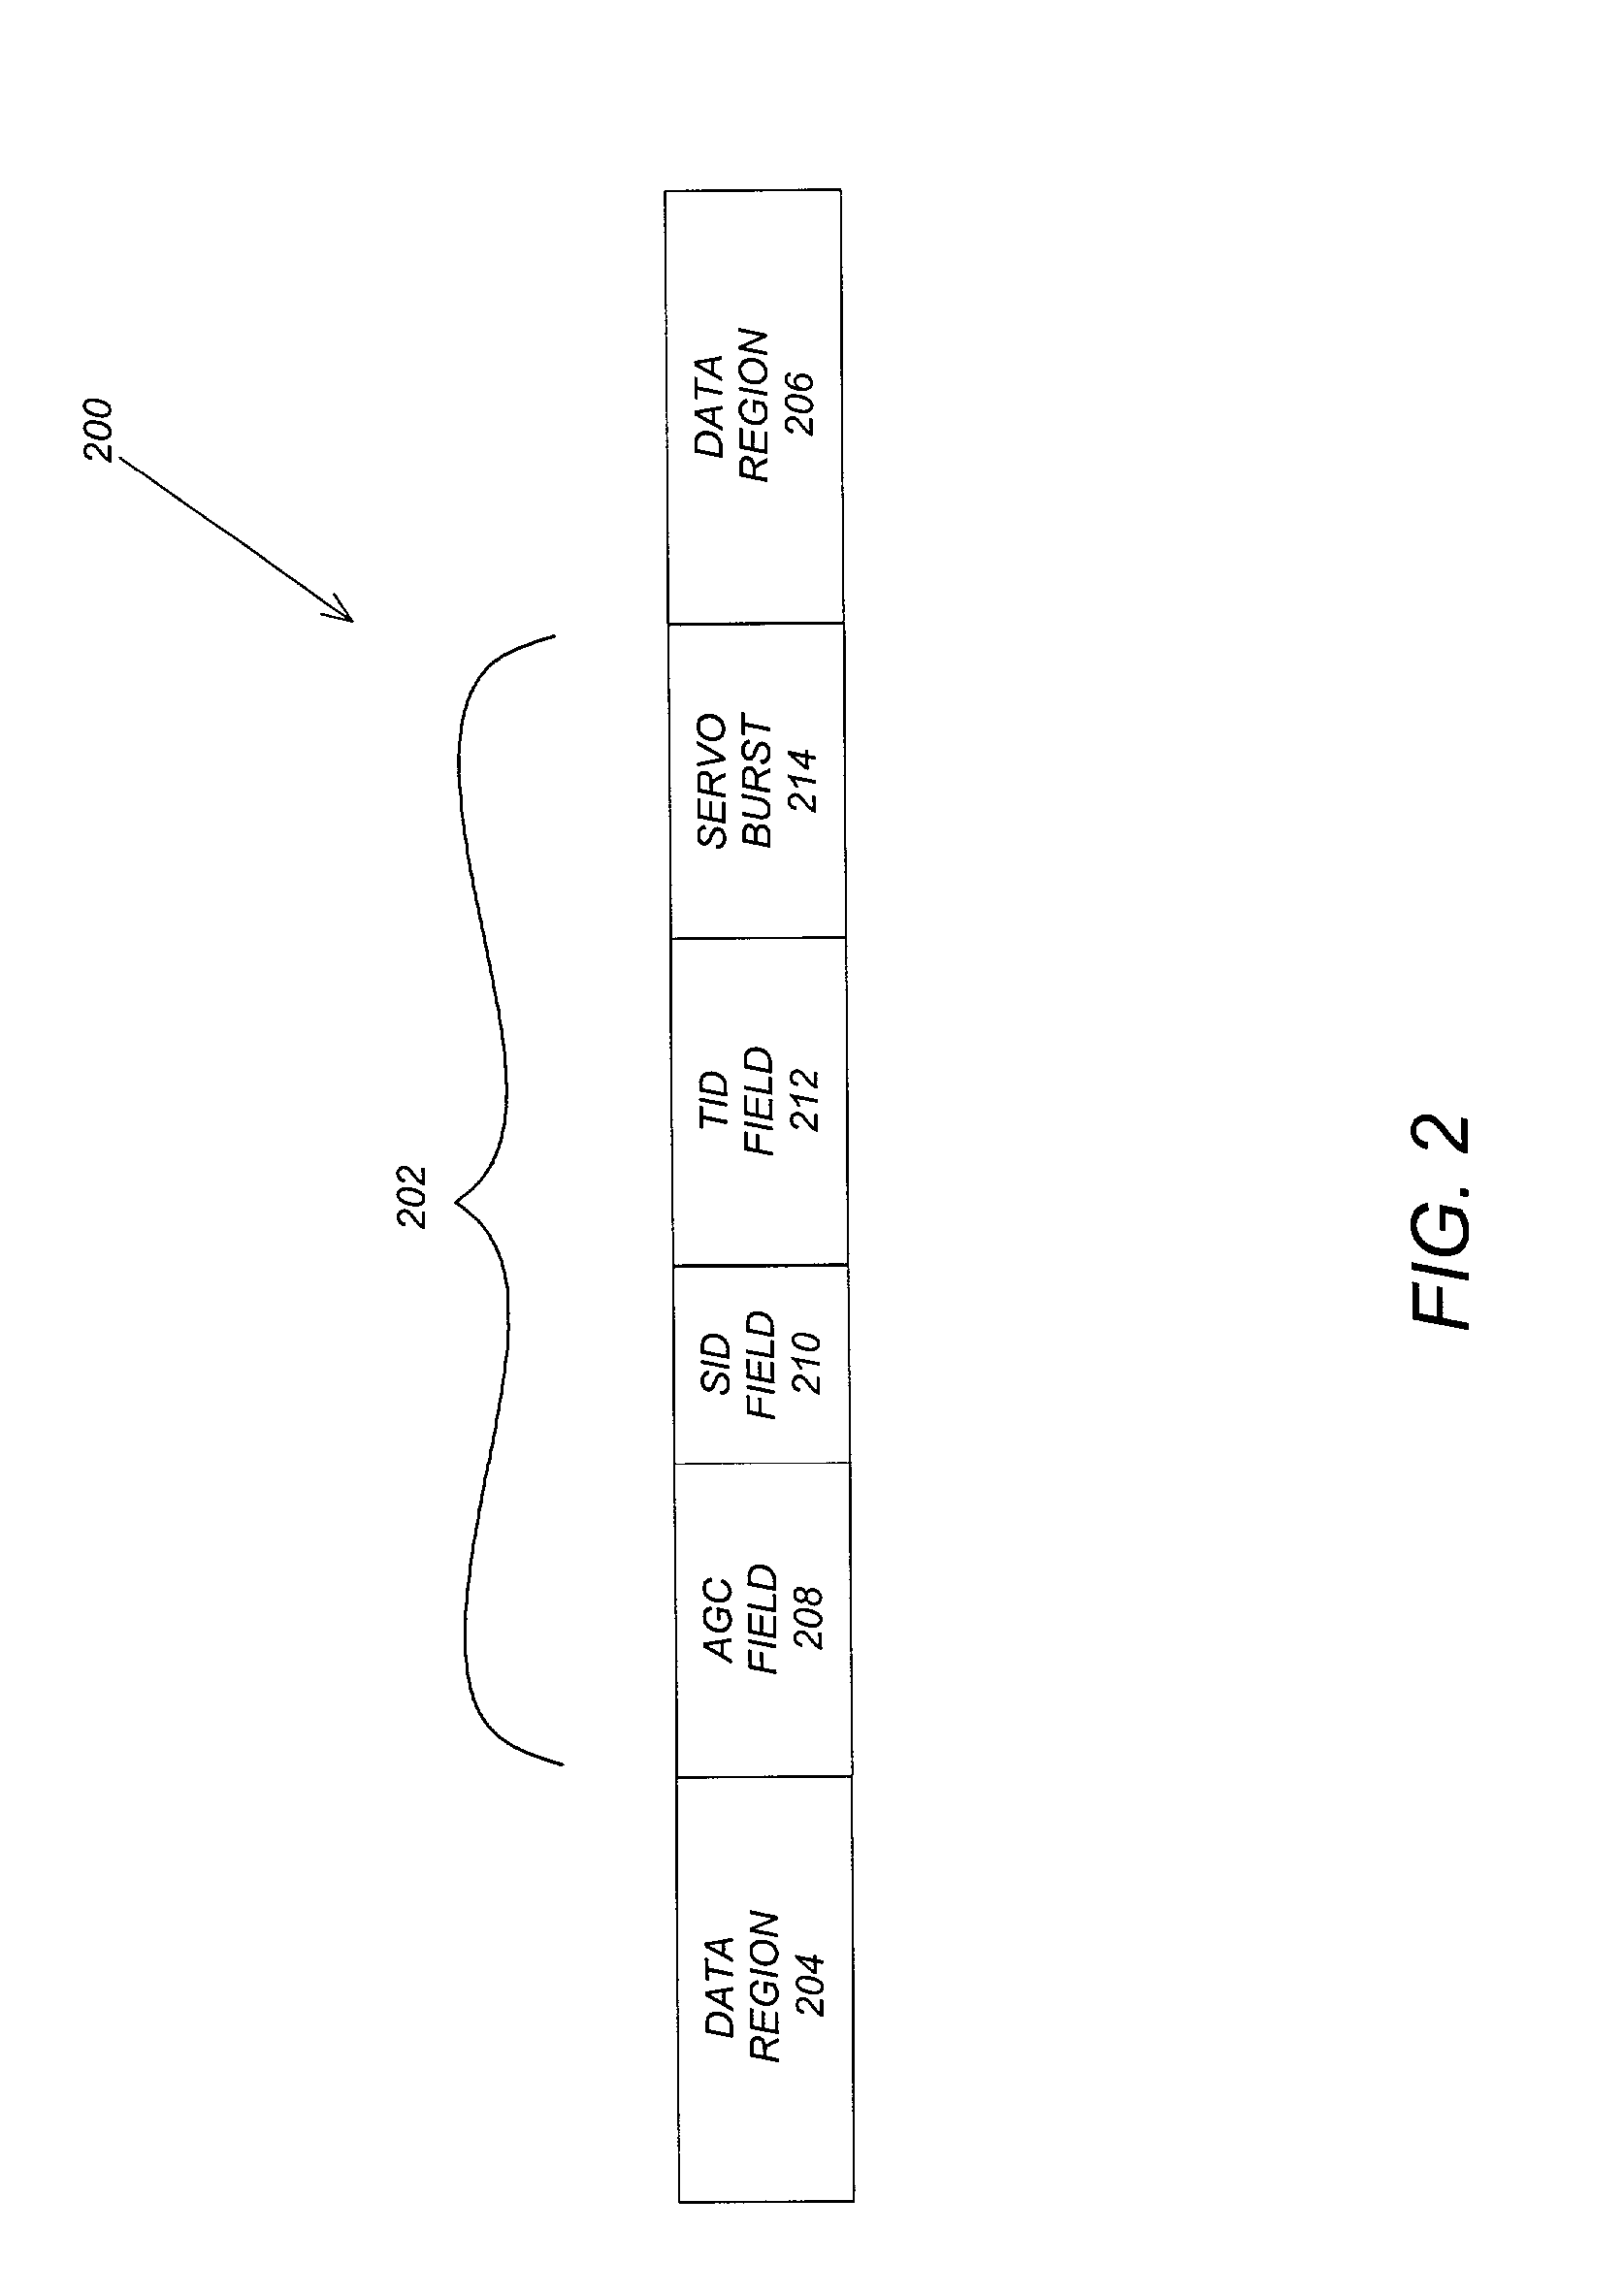 Use of snake-in-the-box codes for reliable identification of tracks in servo fields of a disk drive